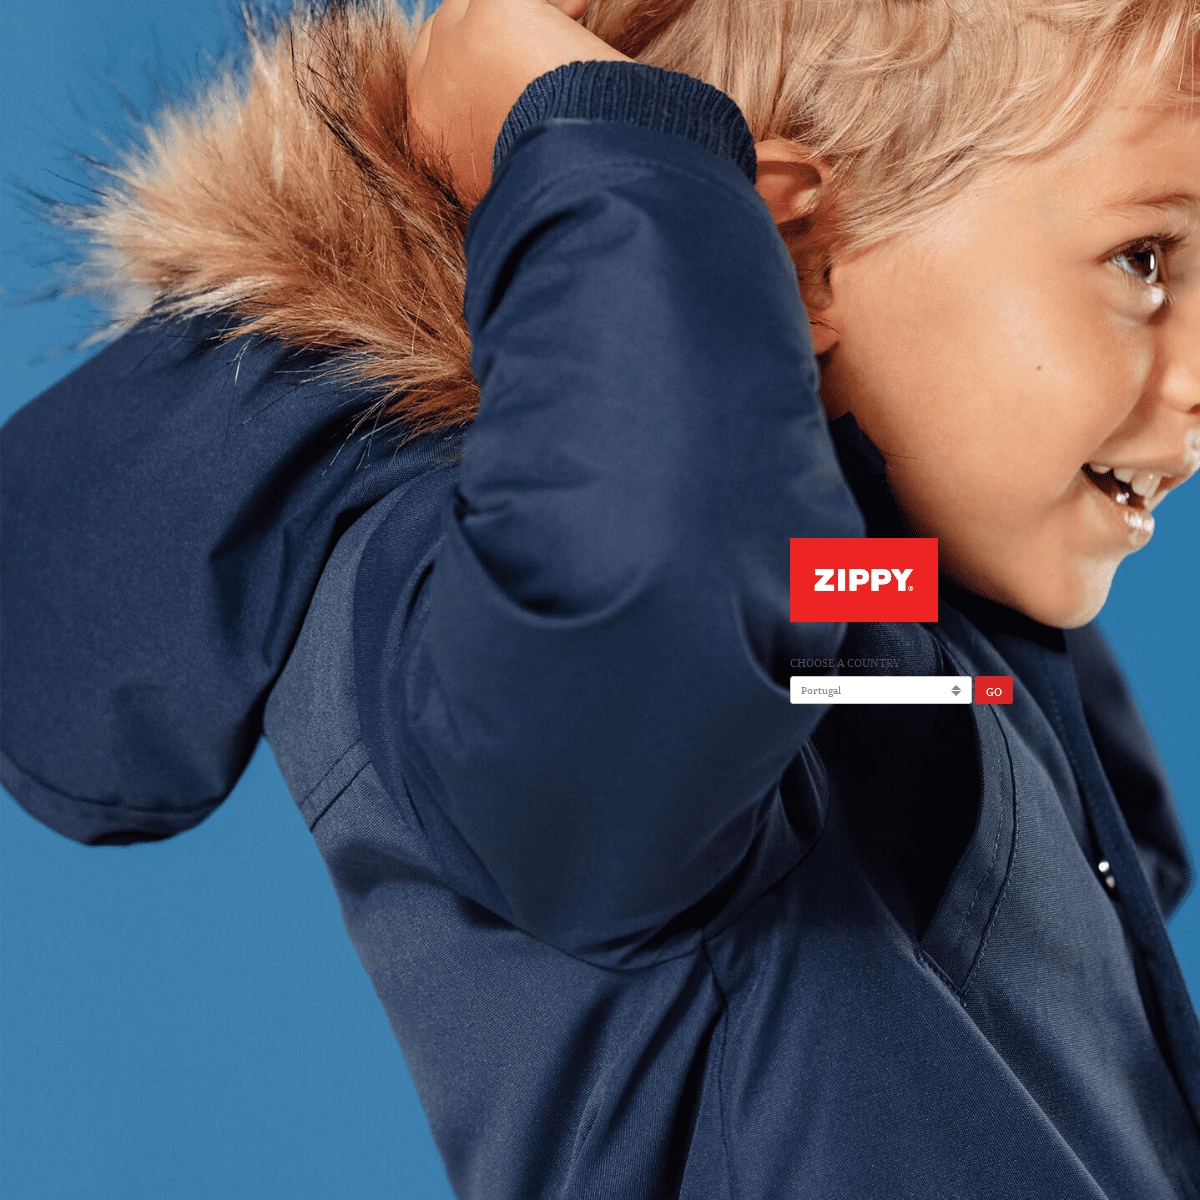 Zippy Kidstore: Clothes, Shoes & Nursery for Kids